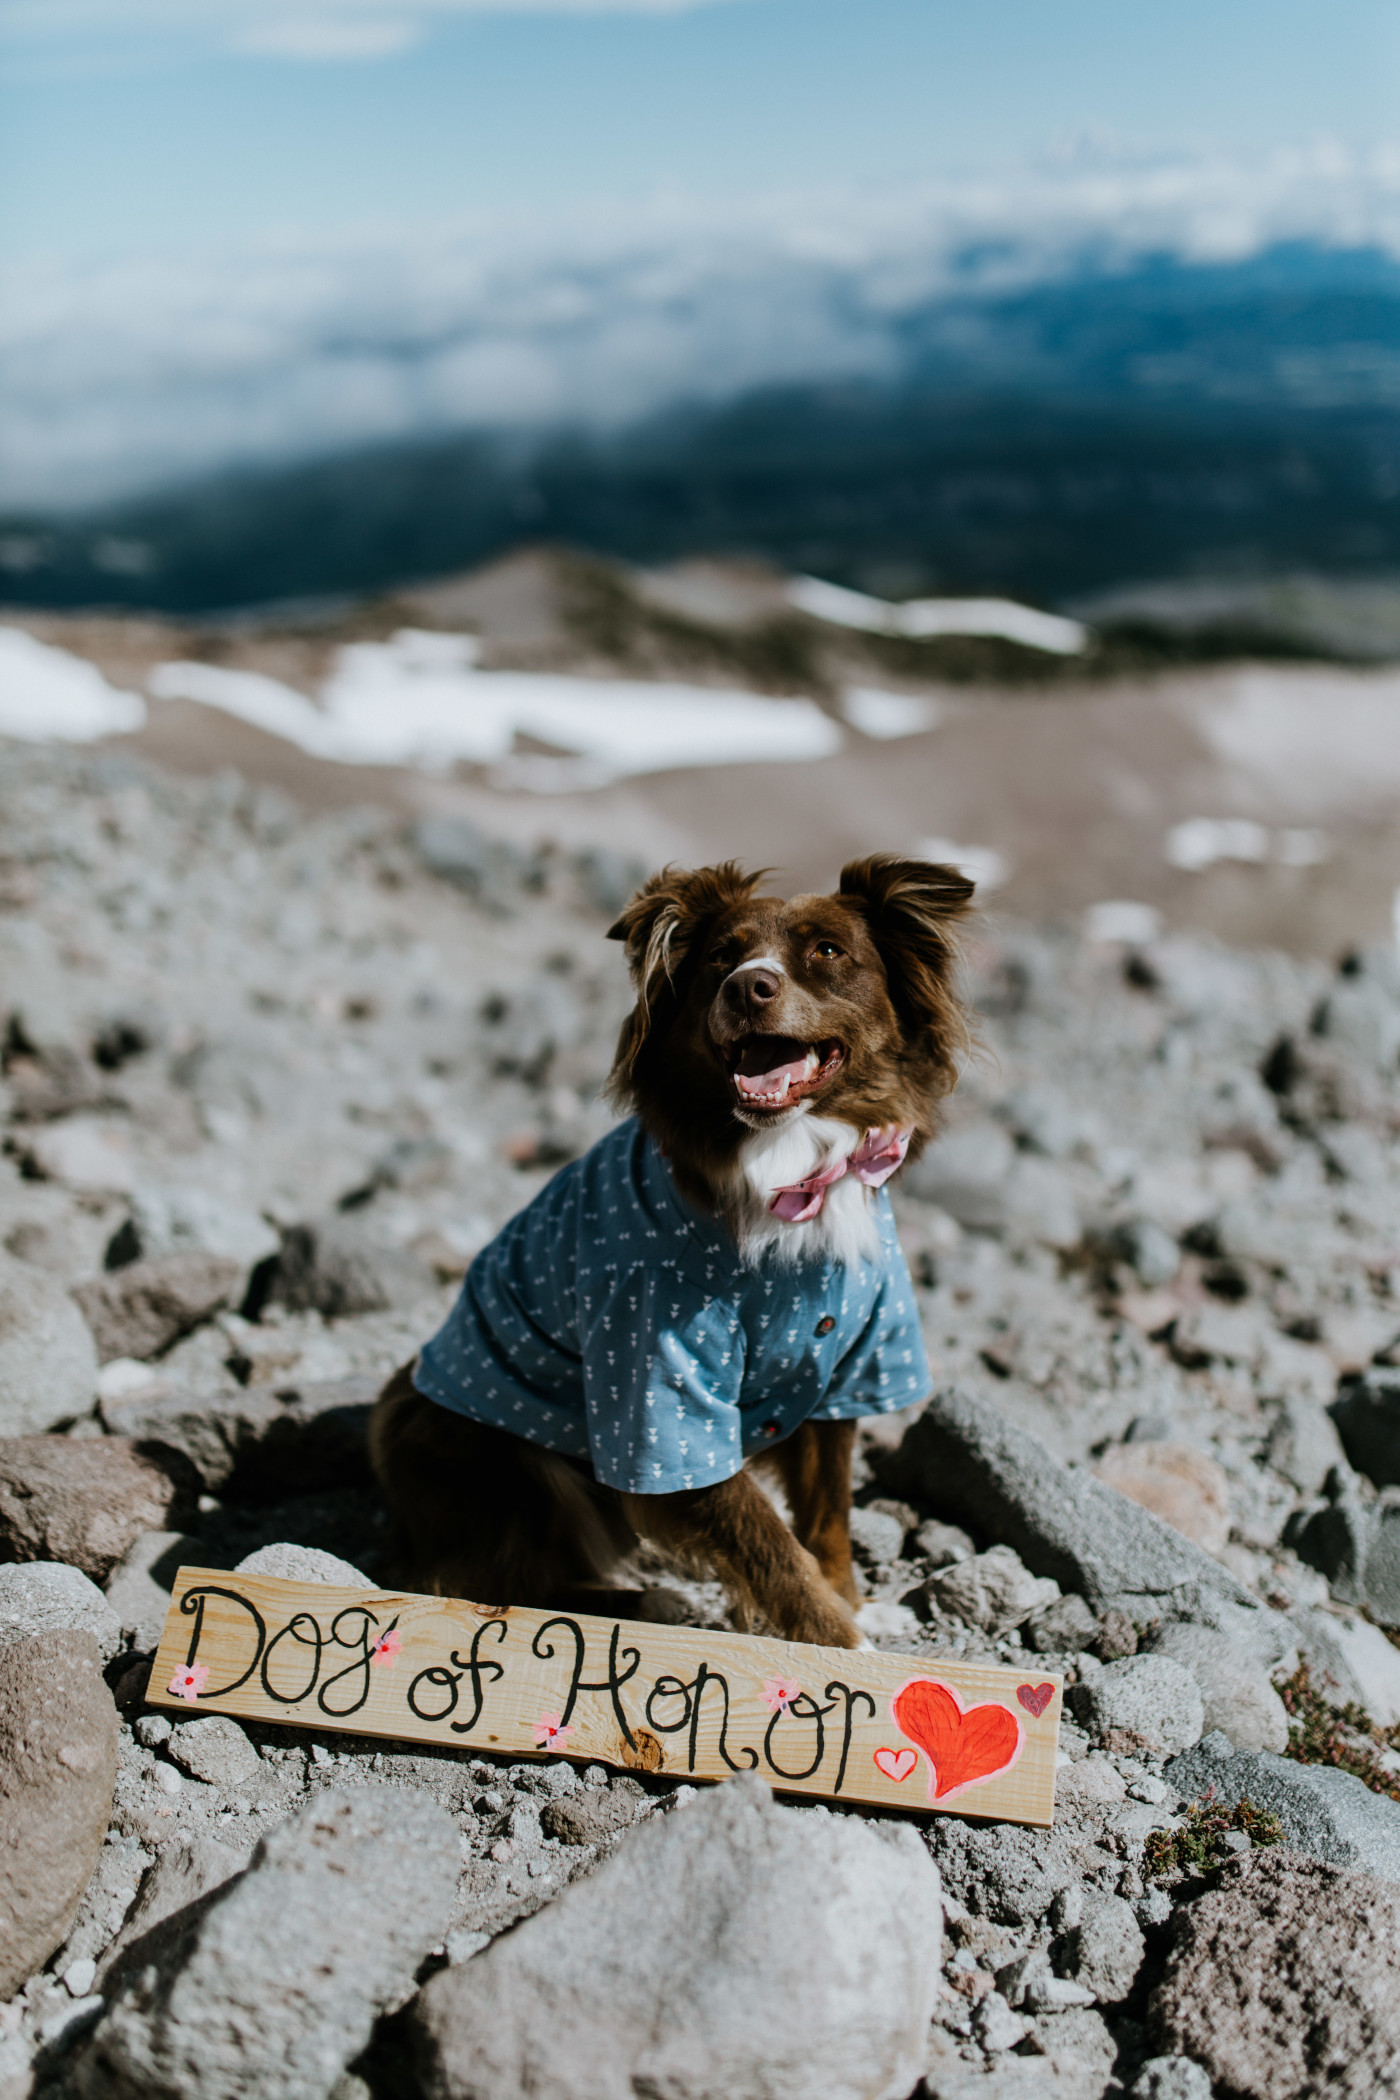 Piper, the Dog of Honor, wears a shirt and sits behind a sign. Elopement photography at Mount Hood by Sienna Plus Josh.